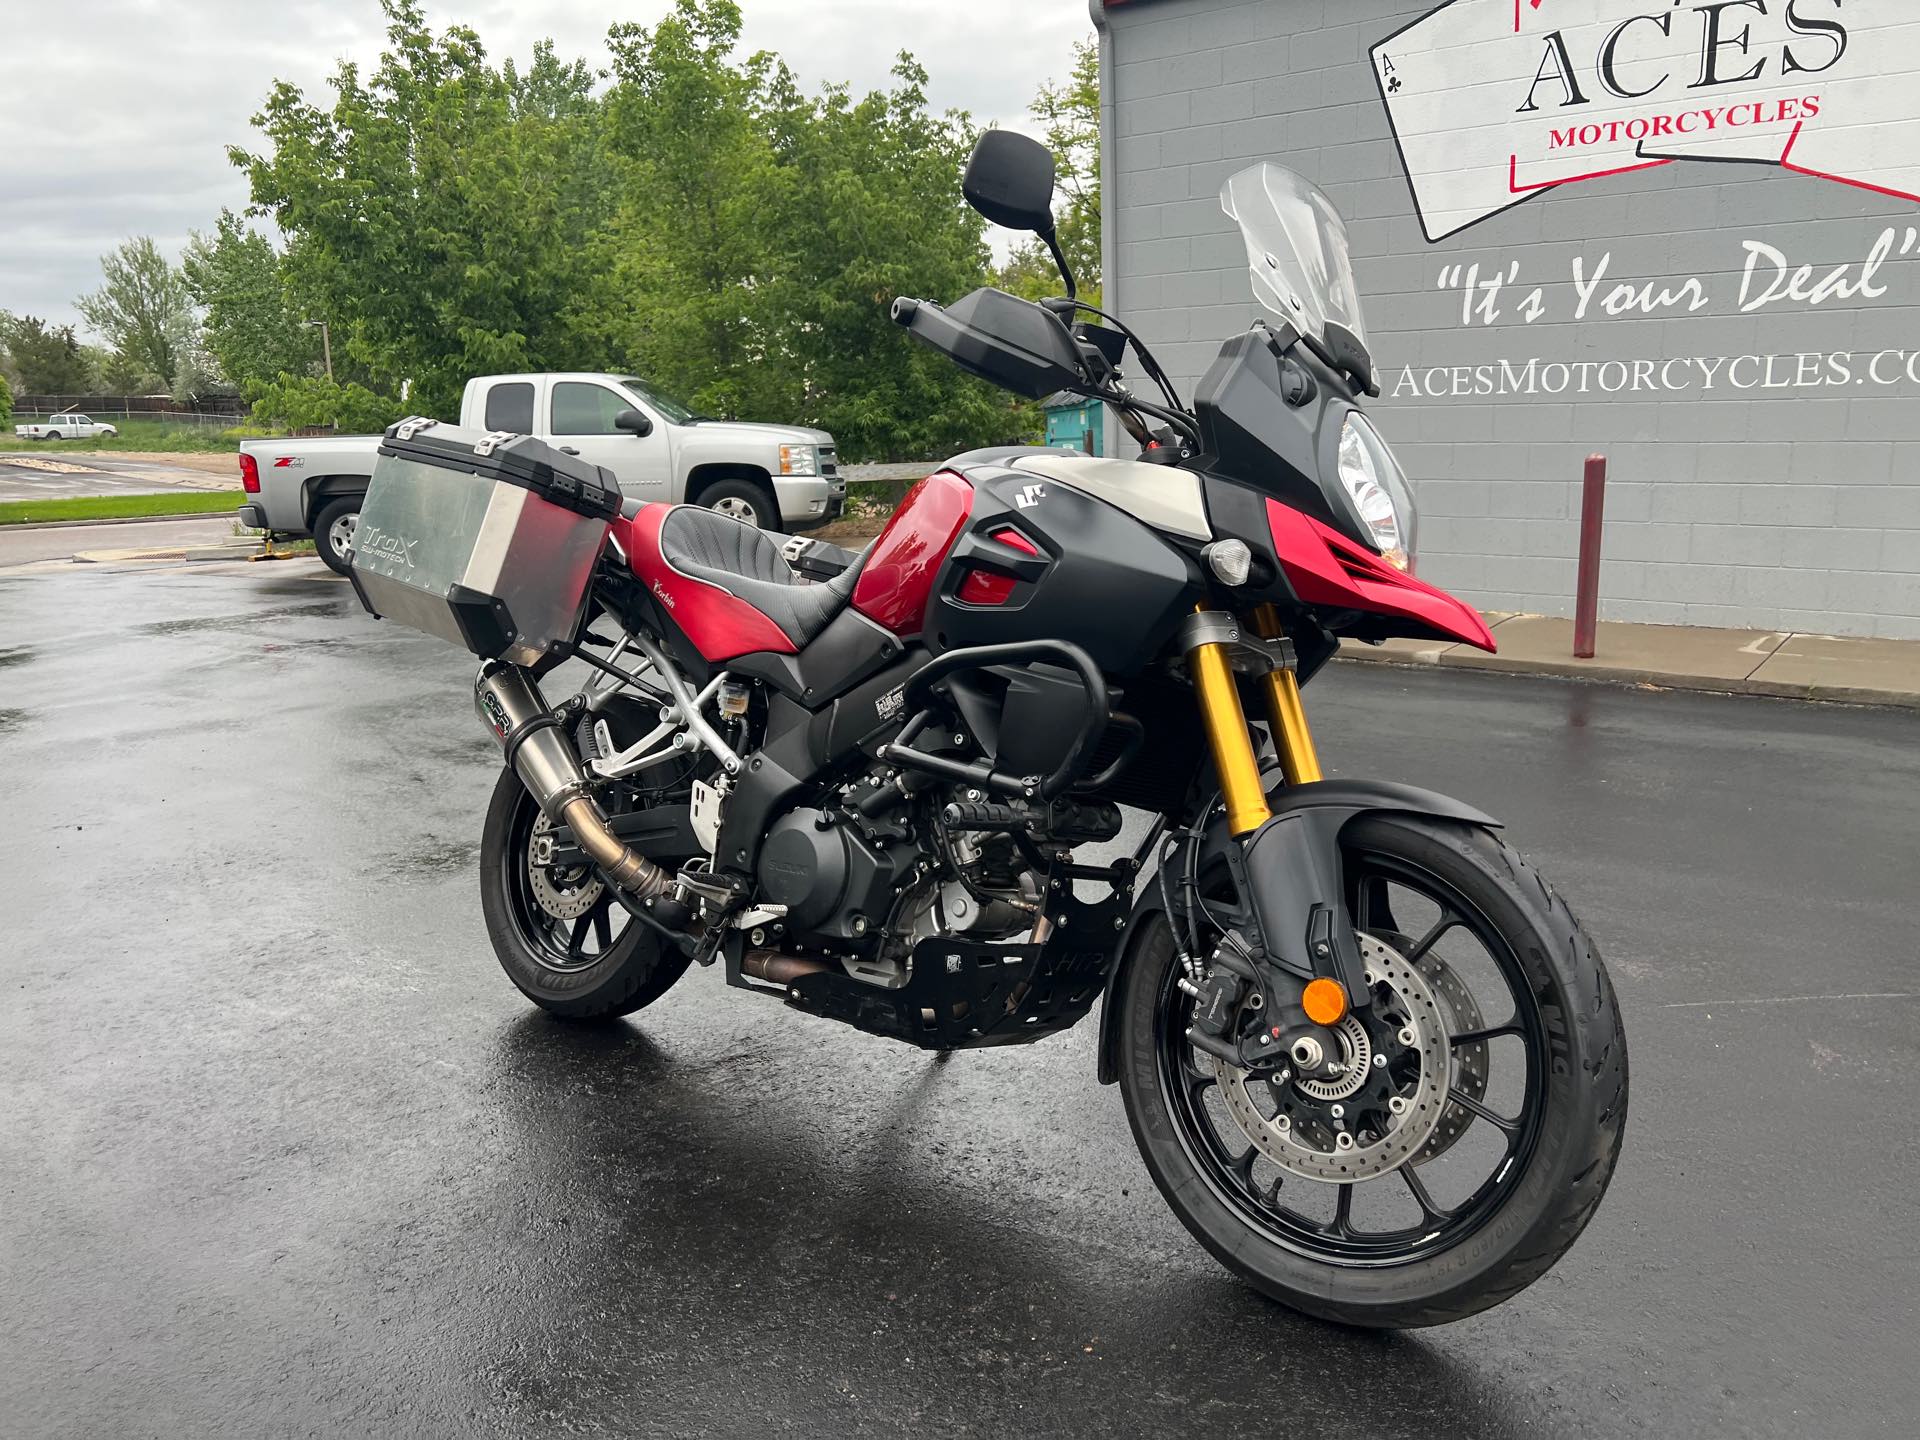 2014 Suzuki V-Strom 1000 ABS Adventure at Aces Motorcycles - Fort Collins